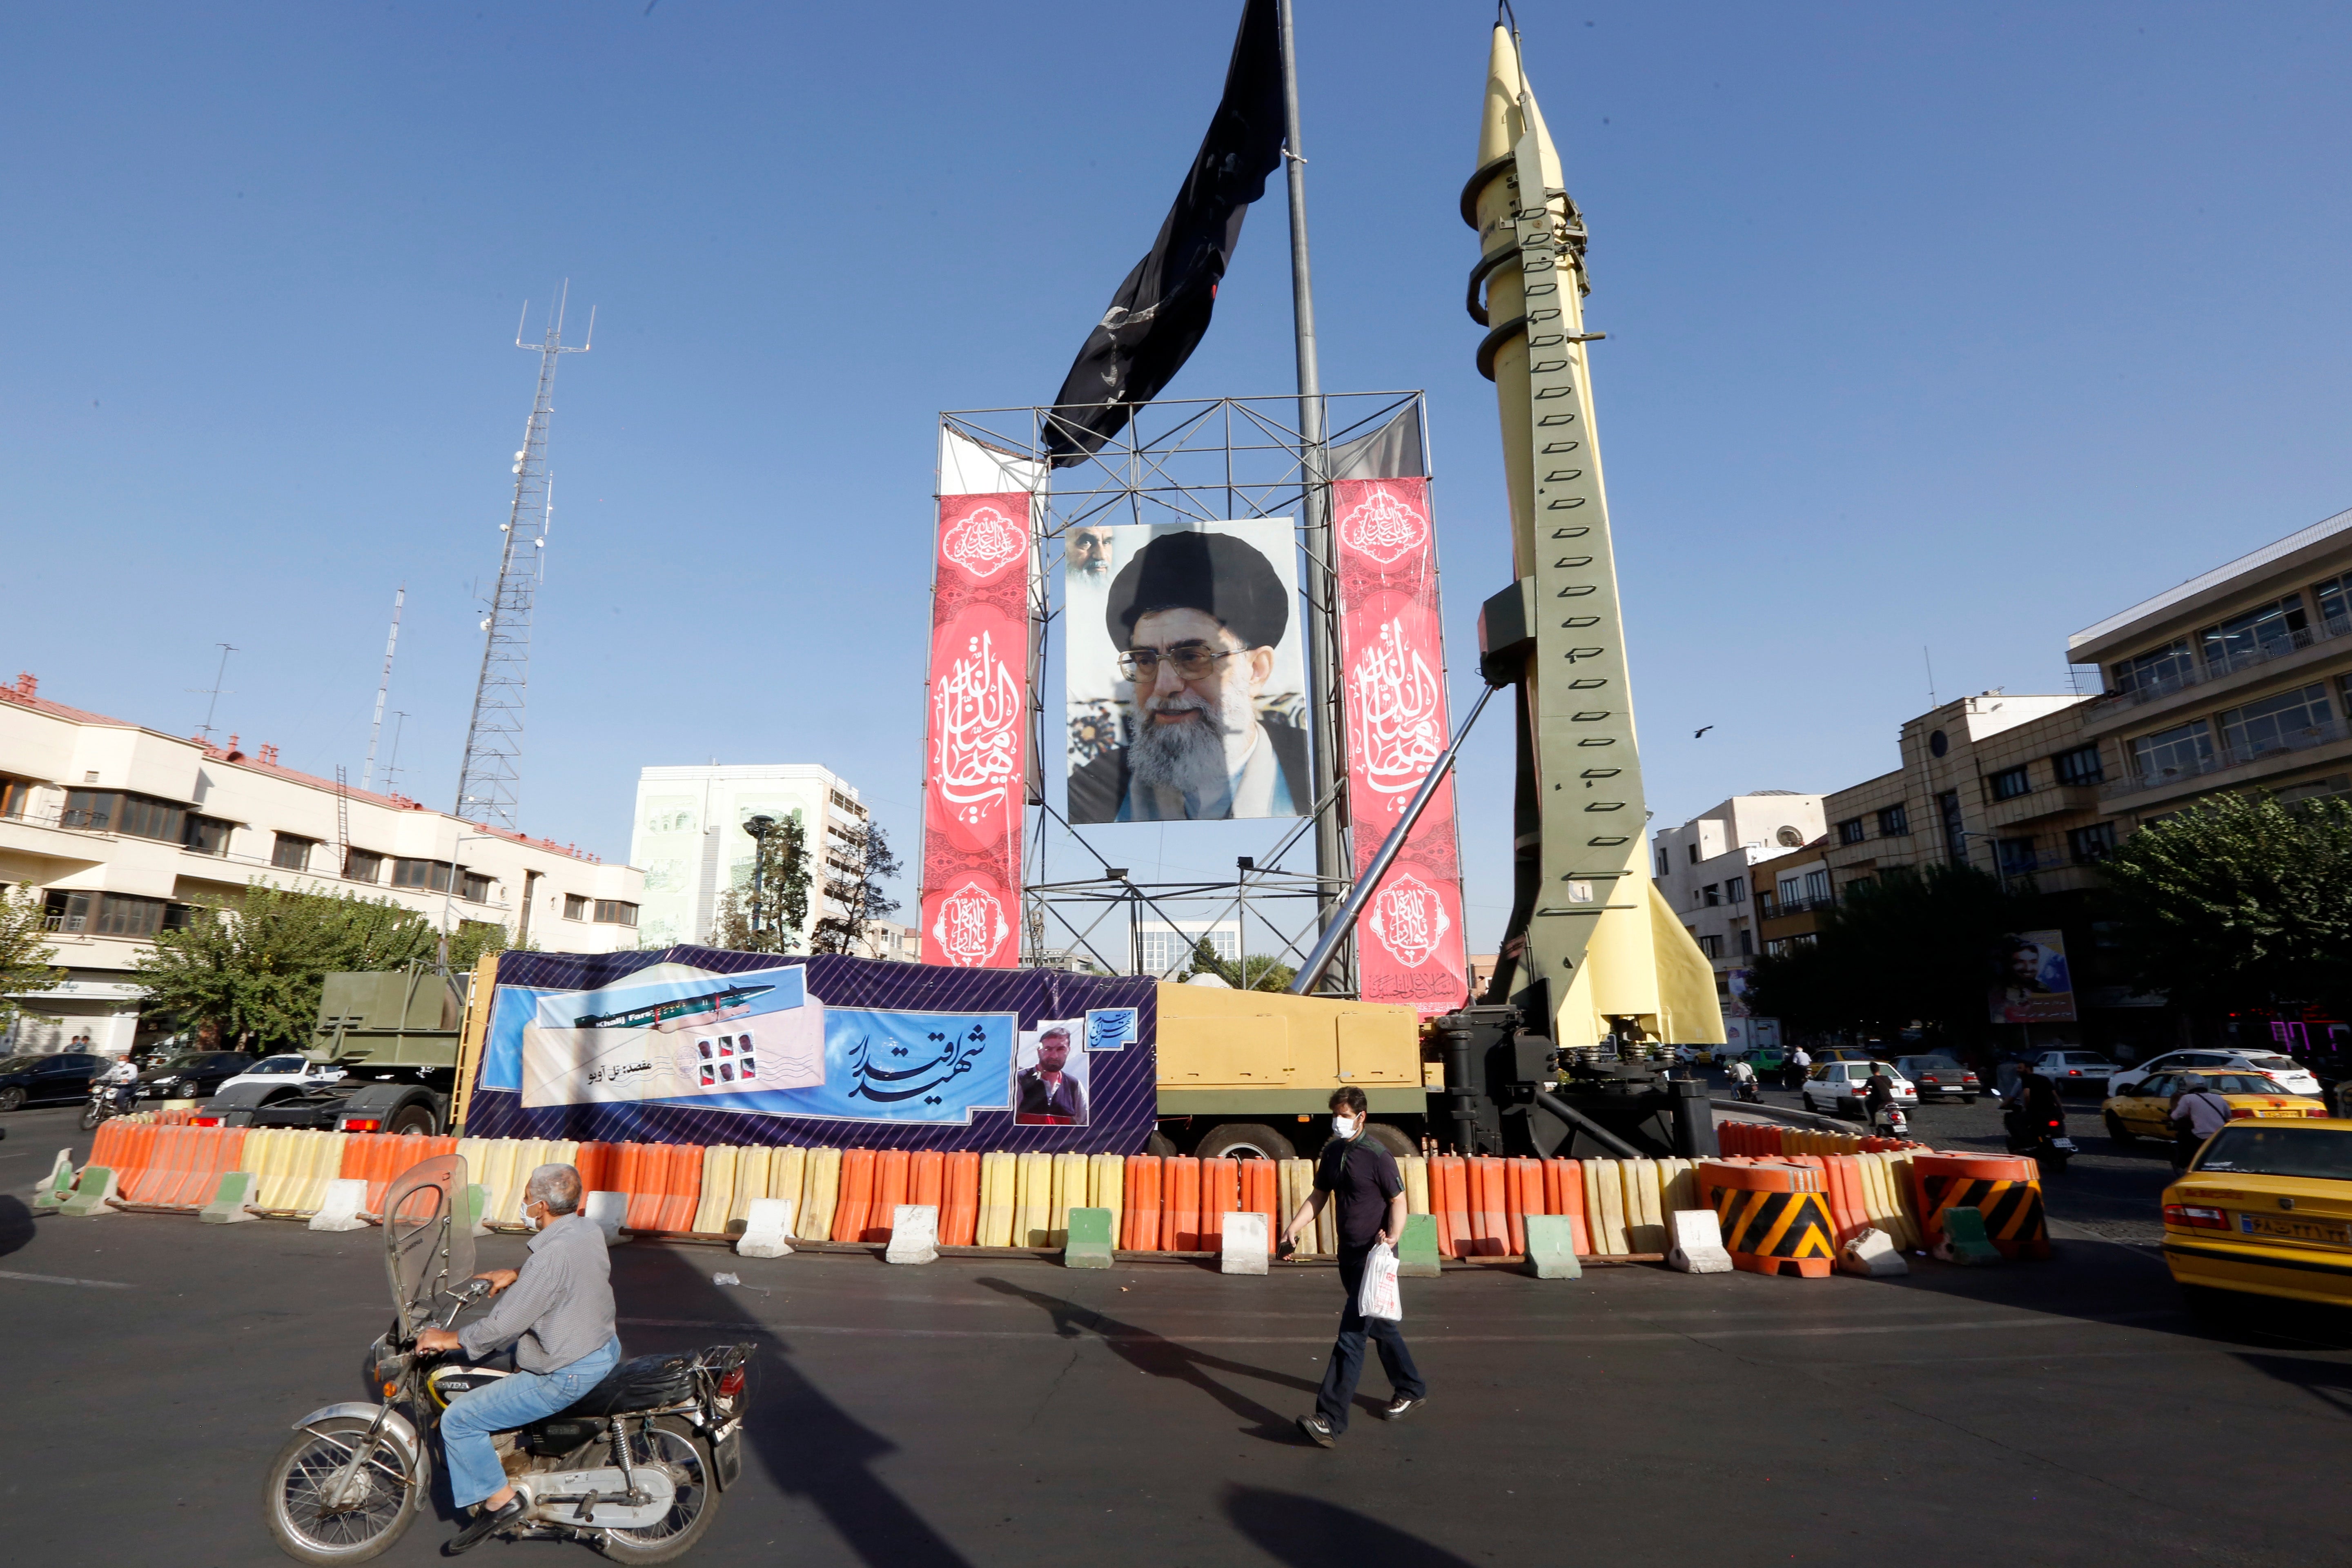 A Shahab-3 surface-to-surface missile on display next to a picture of Iranian supreme leader Ayatollah Ali Khamenei